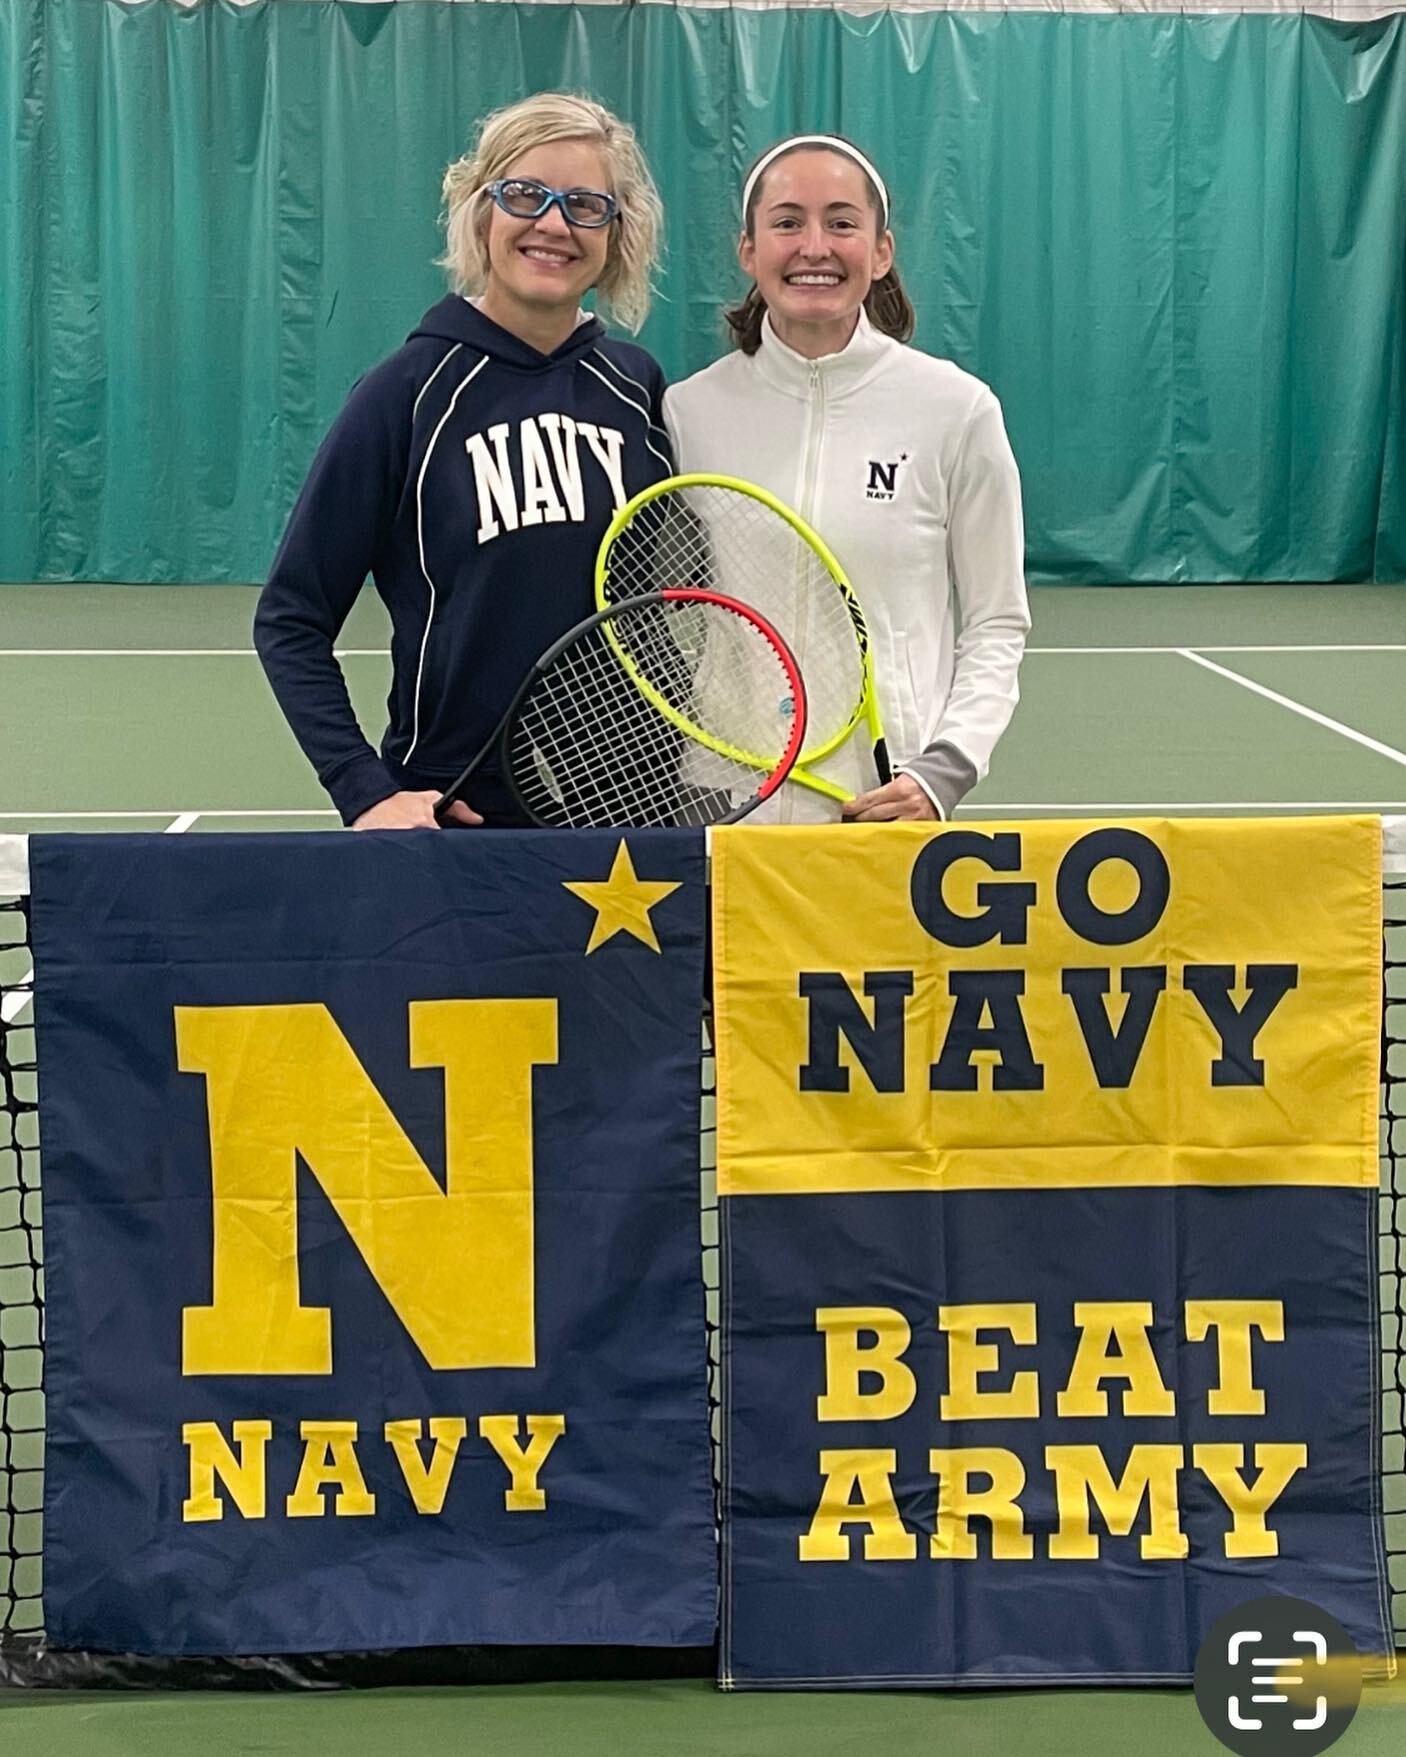 Tennis for the Troops Mentor Program:  Ann Vartuli and Maeve Owens 🇺🇸